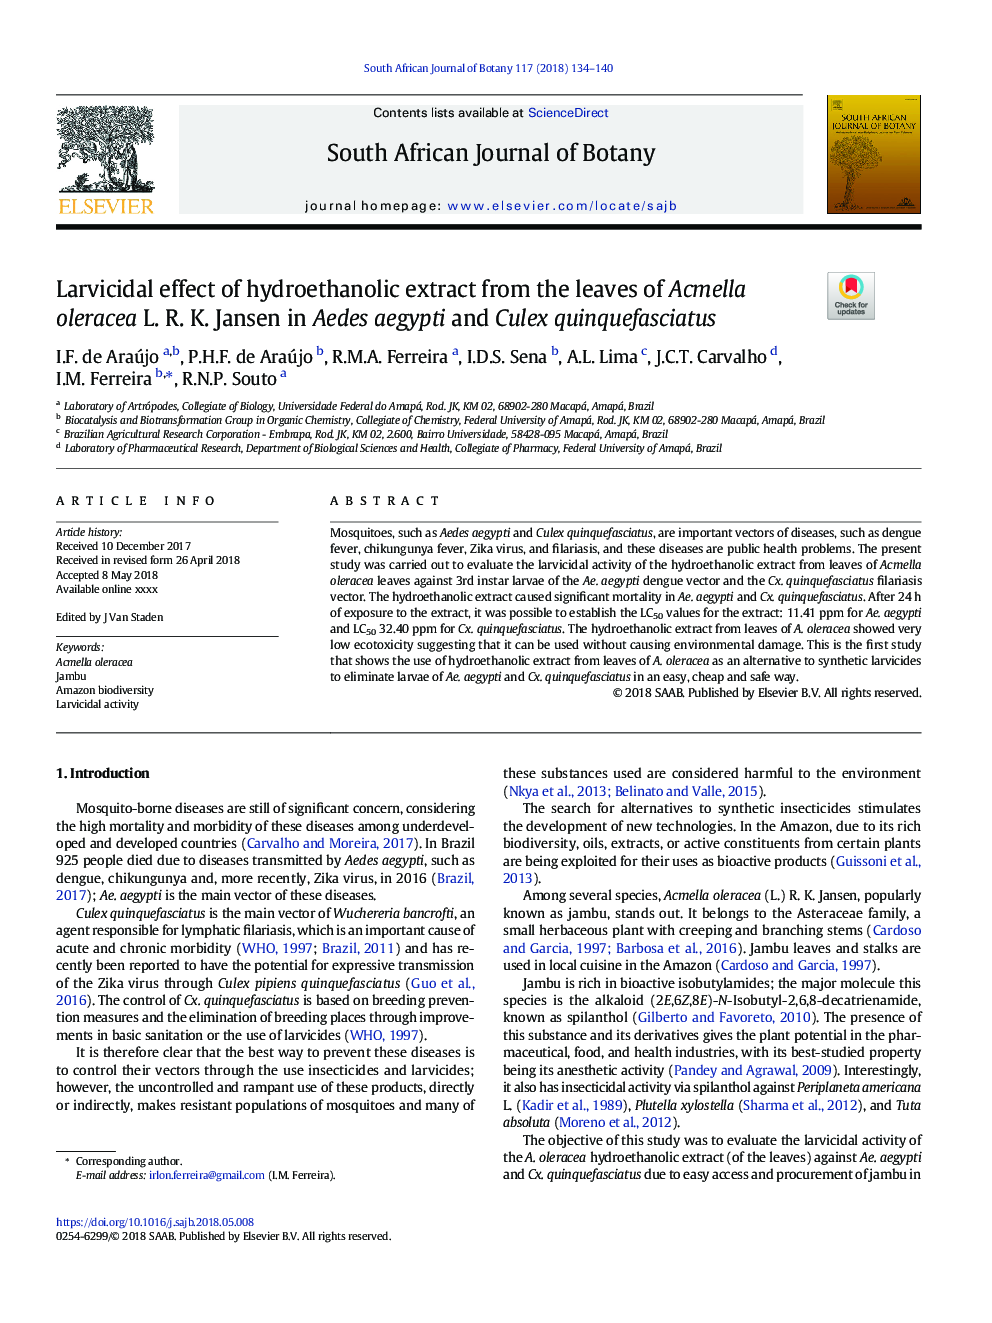 Larvicidal effect of hydroethanolic extract from the leaves of Acmella oleracea L. R. K. Jansen in Aedes aegypti and Culex quinquefasciatus